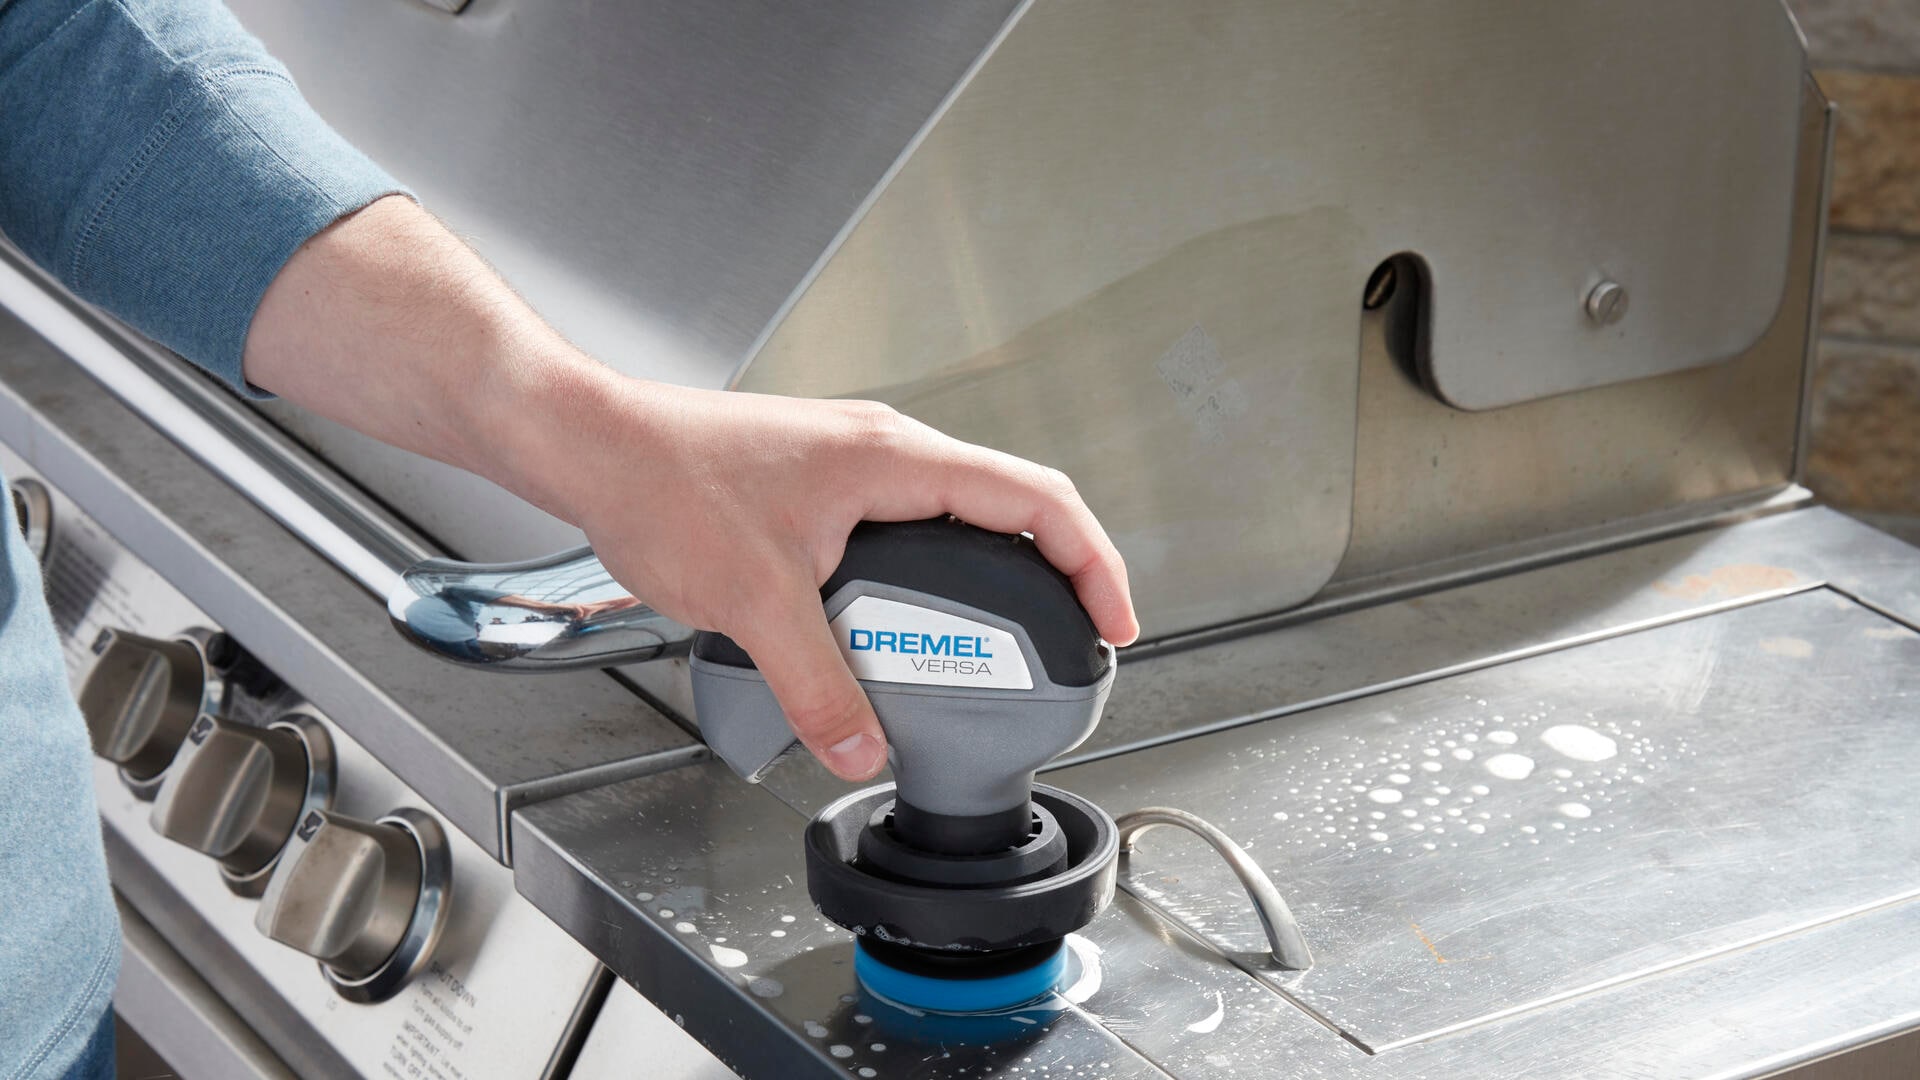 at Versa Scrubbers in Power the Dremel department Scrubber Power